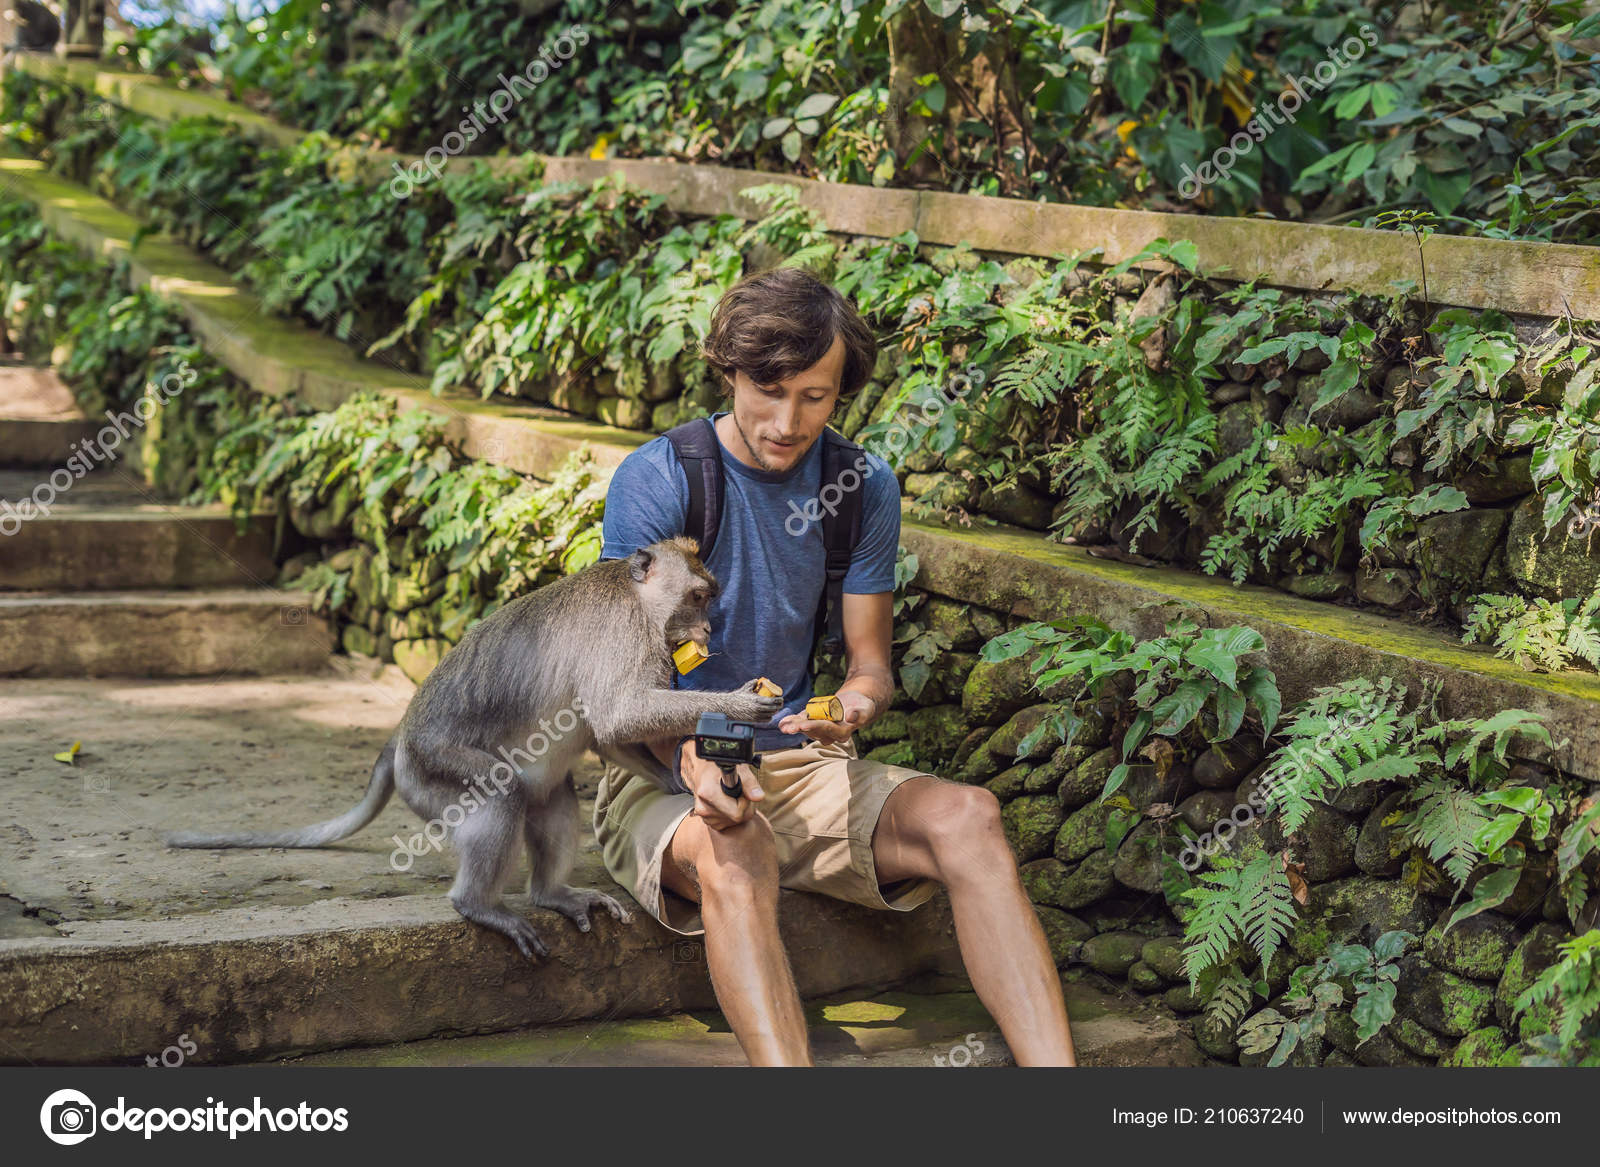 Young Man Using Selfie Stick Taking Selfie Funny Macaque Monkey Stock Photo by 210637240